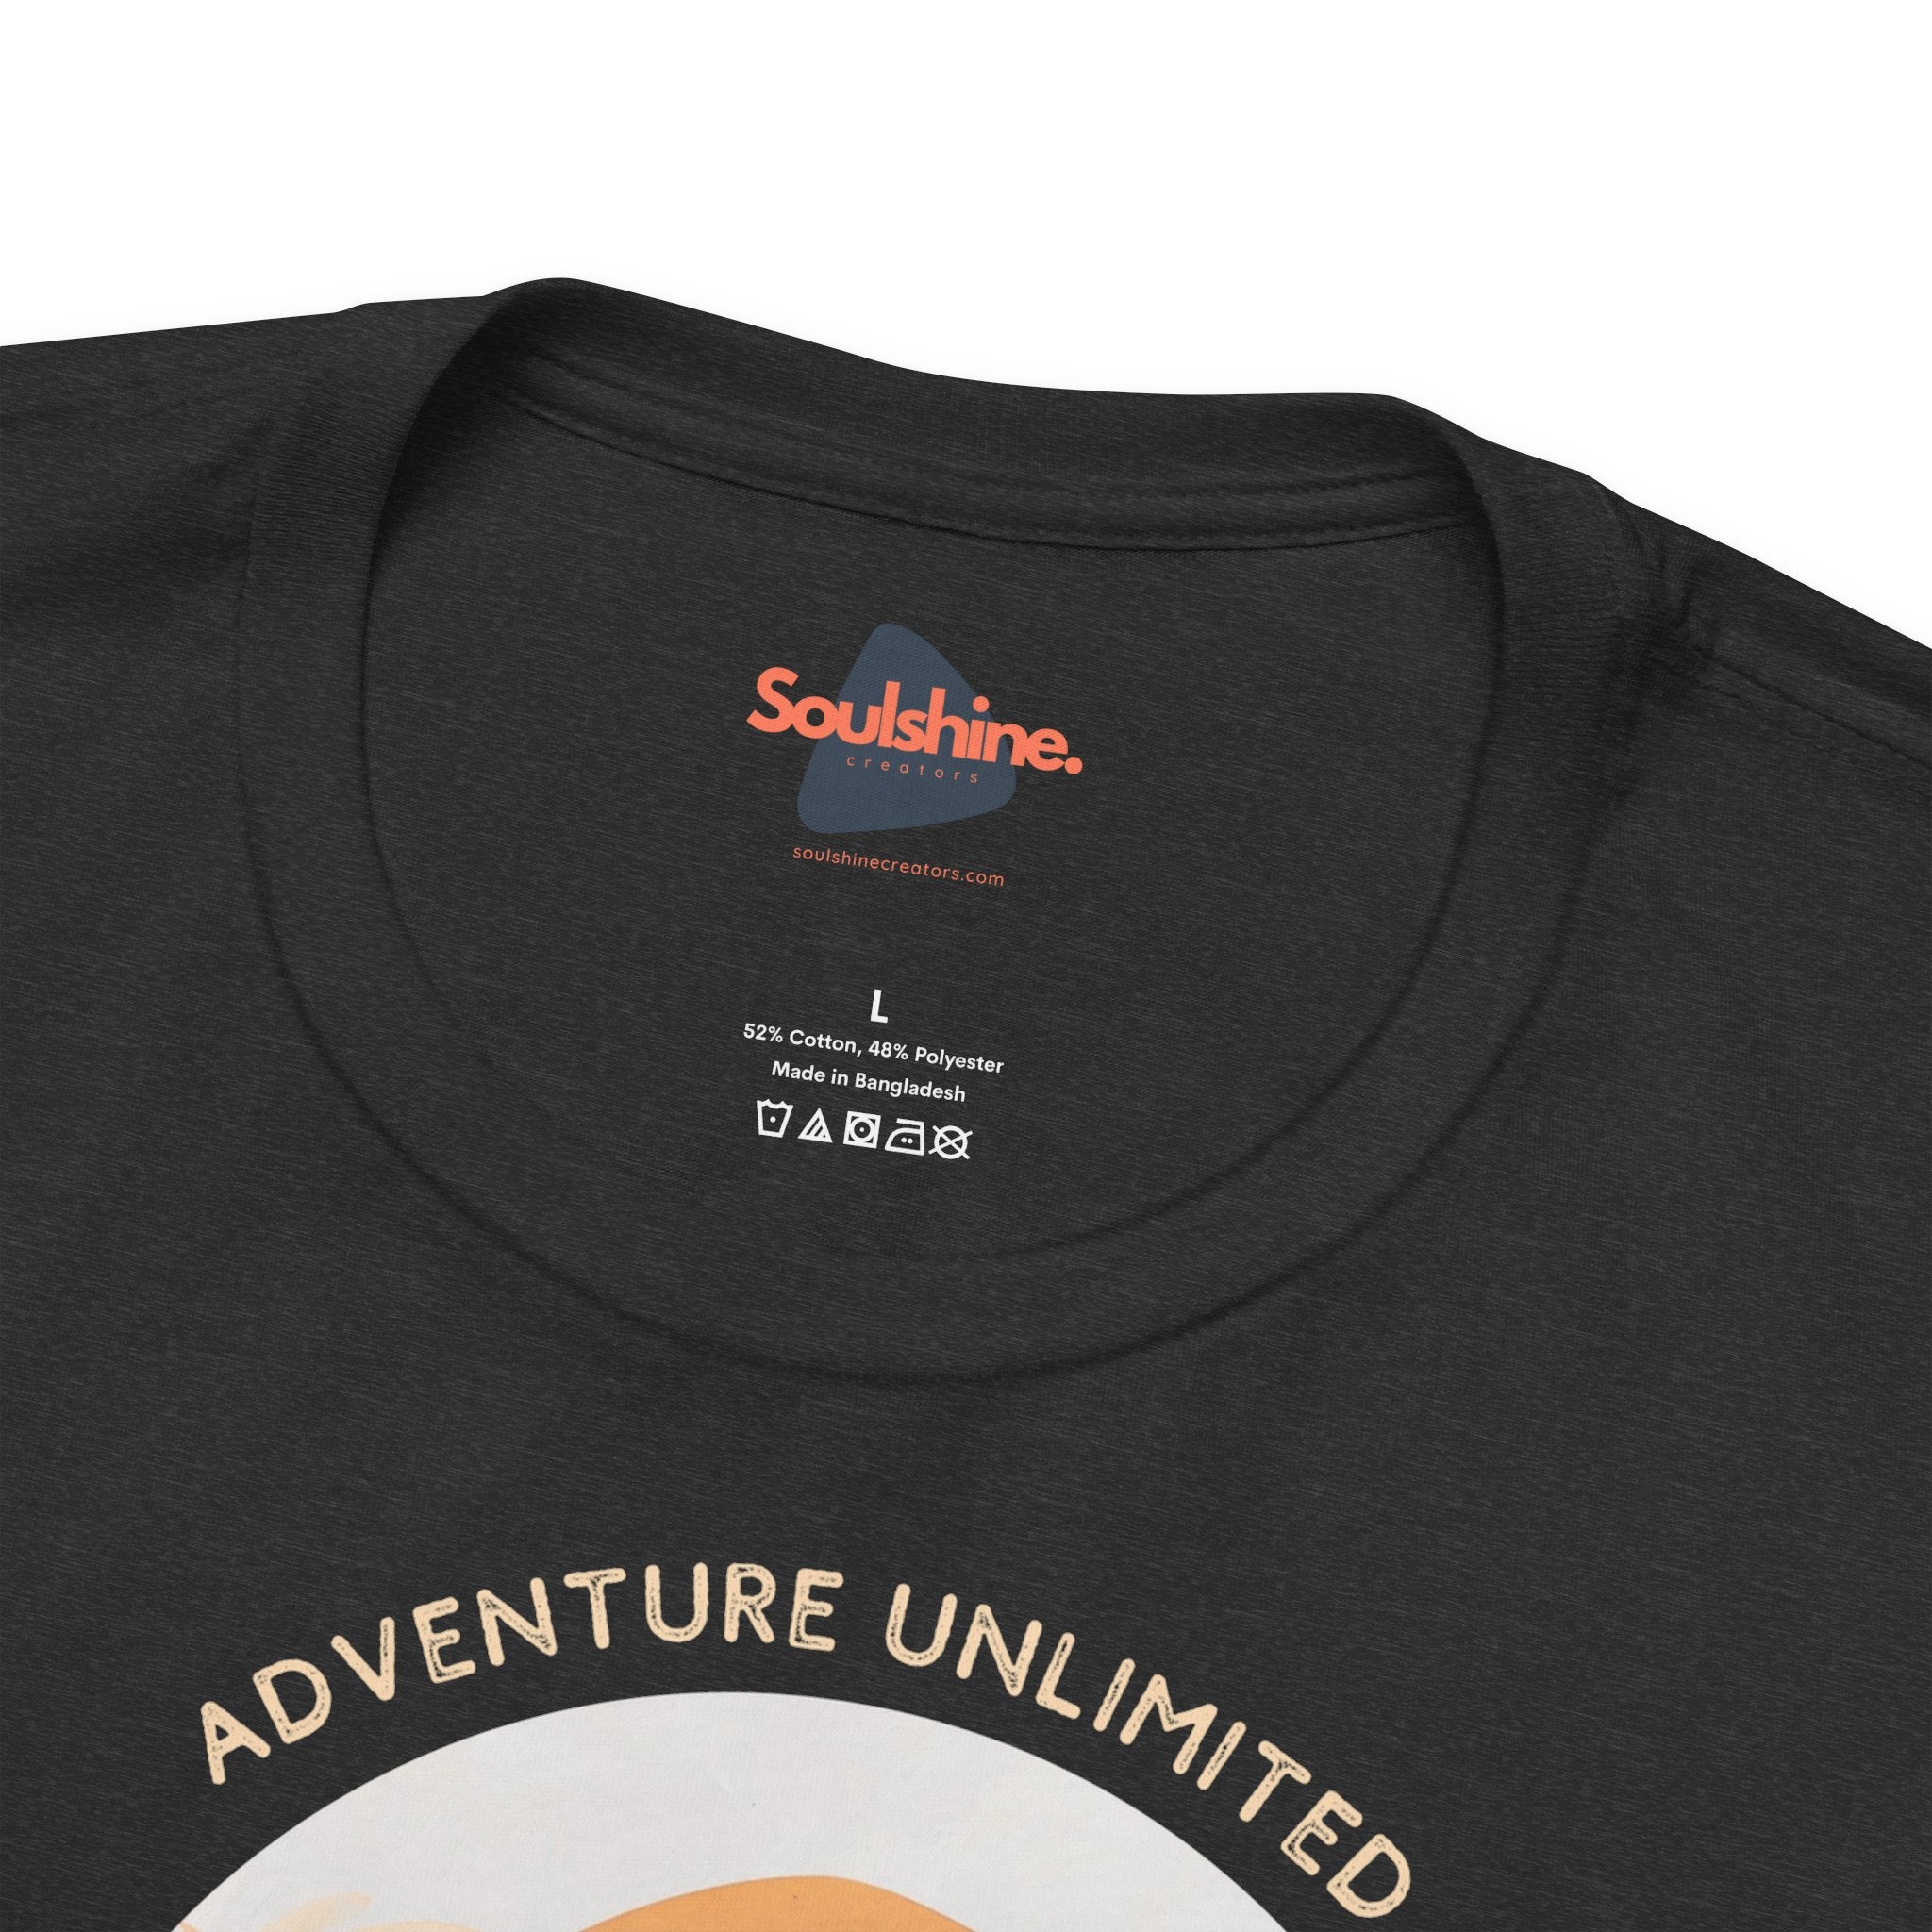 Adventure Unlimited surfing tee shirt on Bella & Canvas EU, direct-to-garment printed item